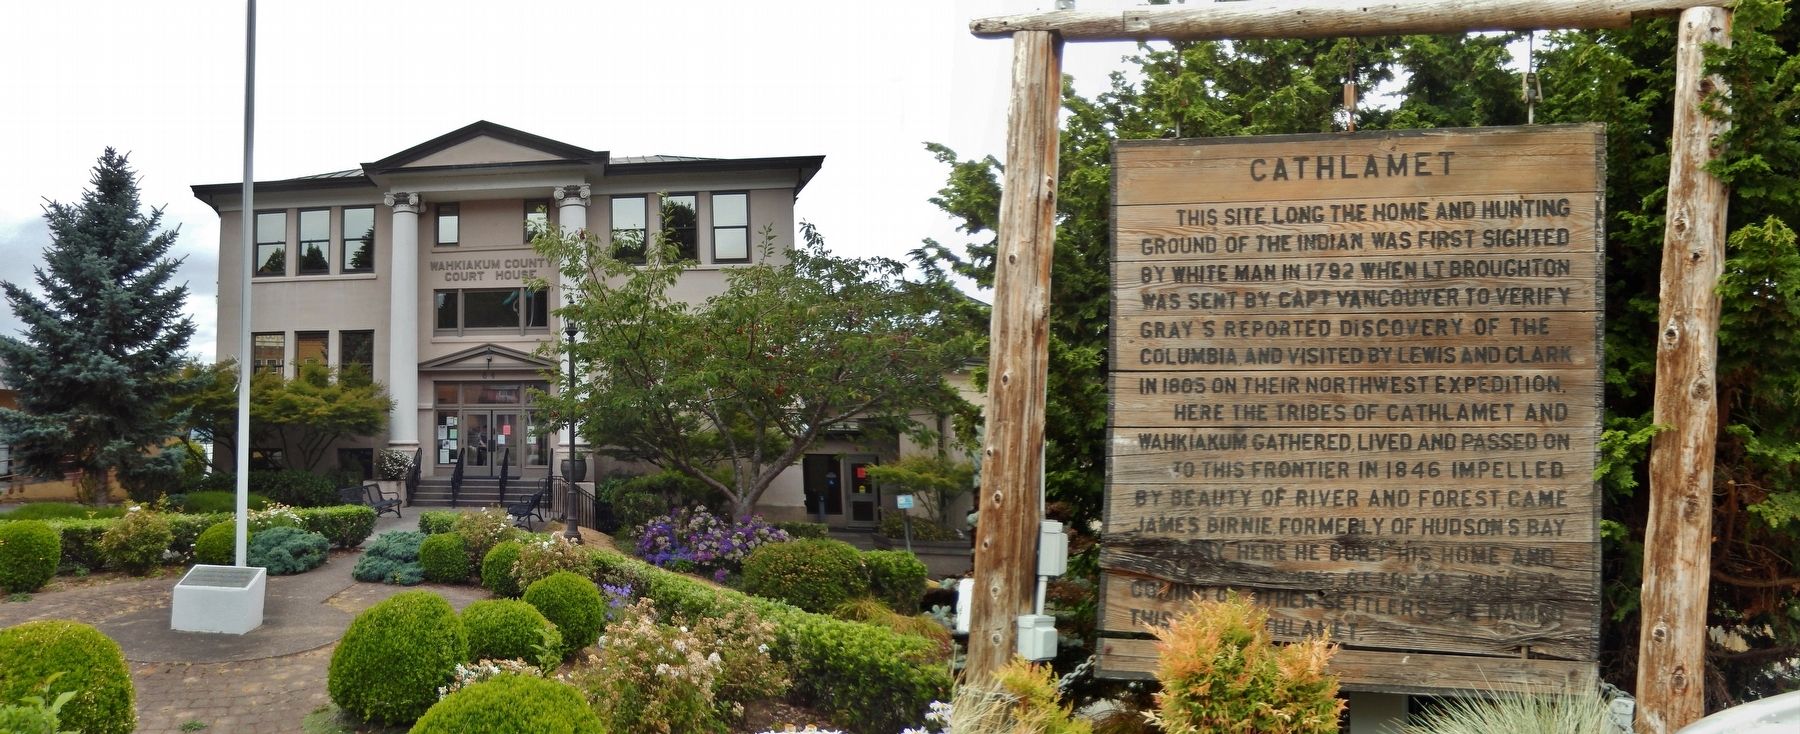 Cathlamet Marker (<i>wide view; Wahkiakum County Courthouse in background</i>) image. Click for full size.